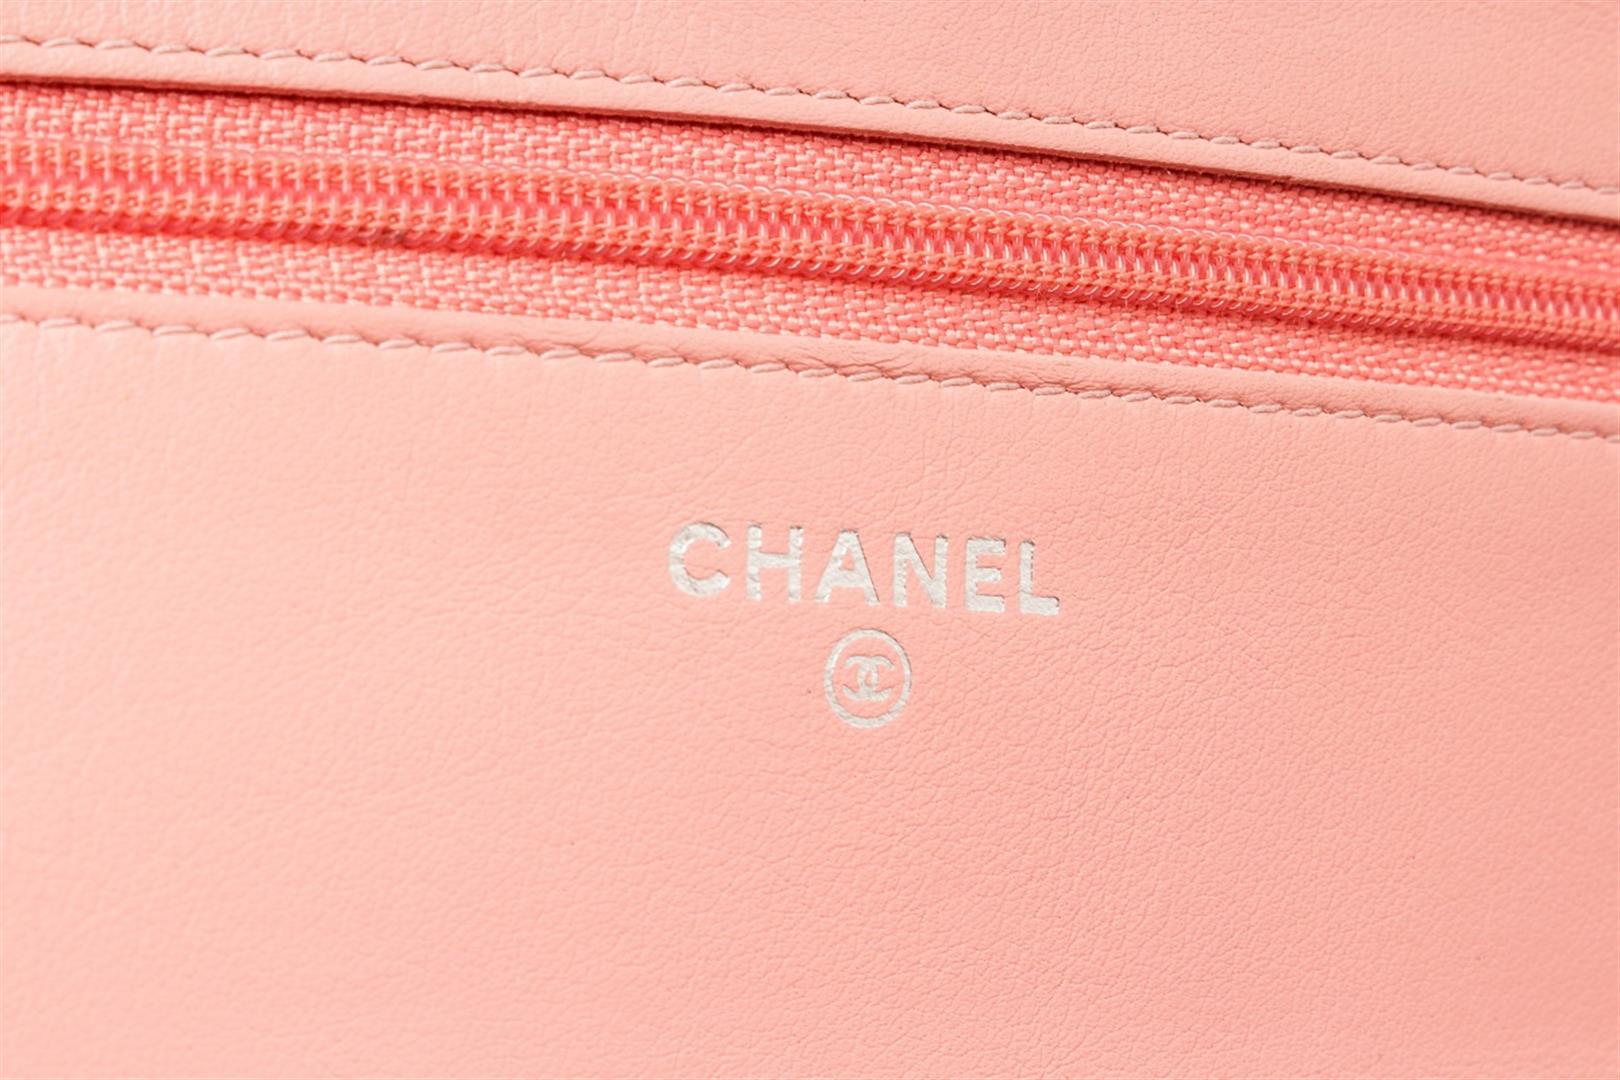 Chanel Pink Patent Leather Wallet on Chain Crossbody Bag